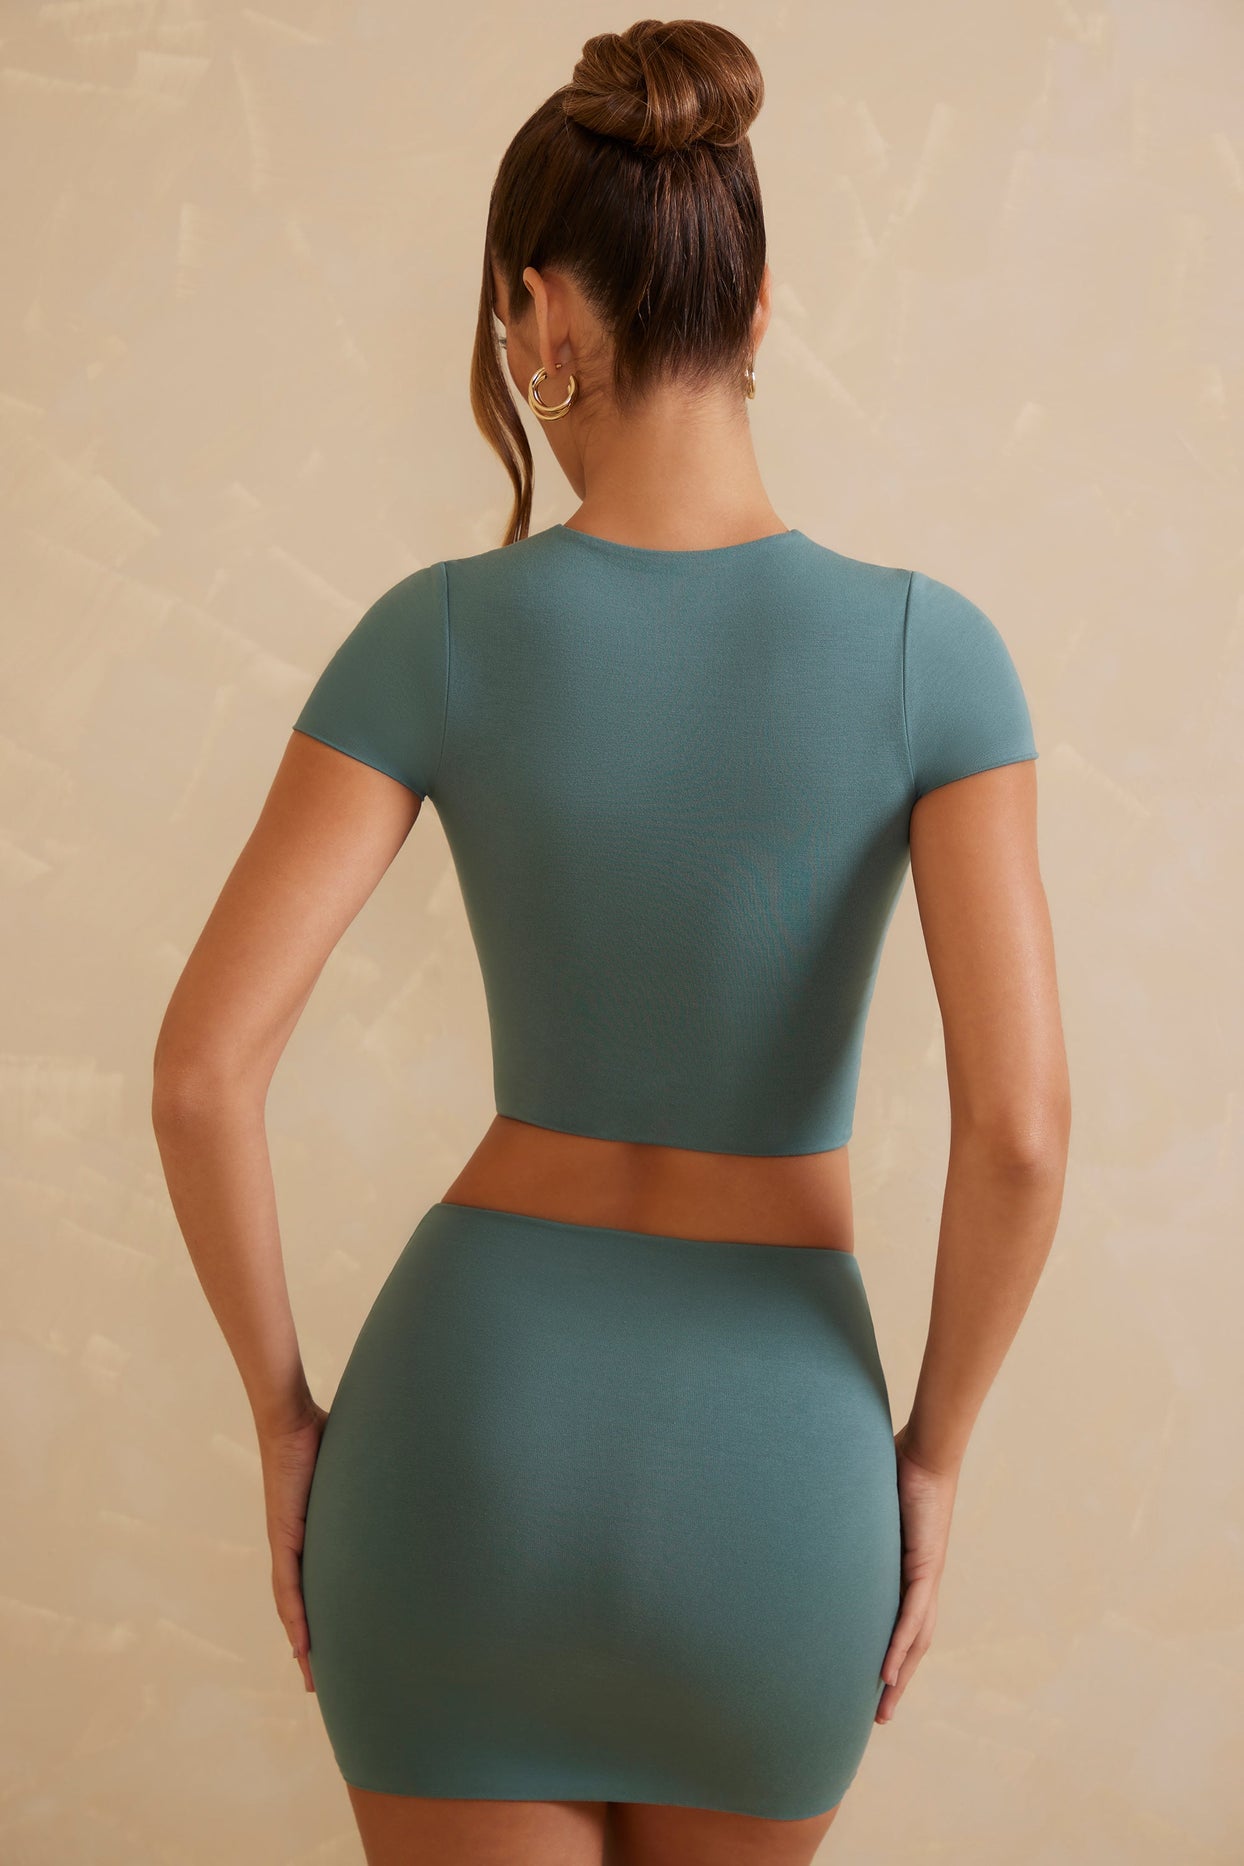 Low Rise Bodycon Mini Skirt in Teal